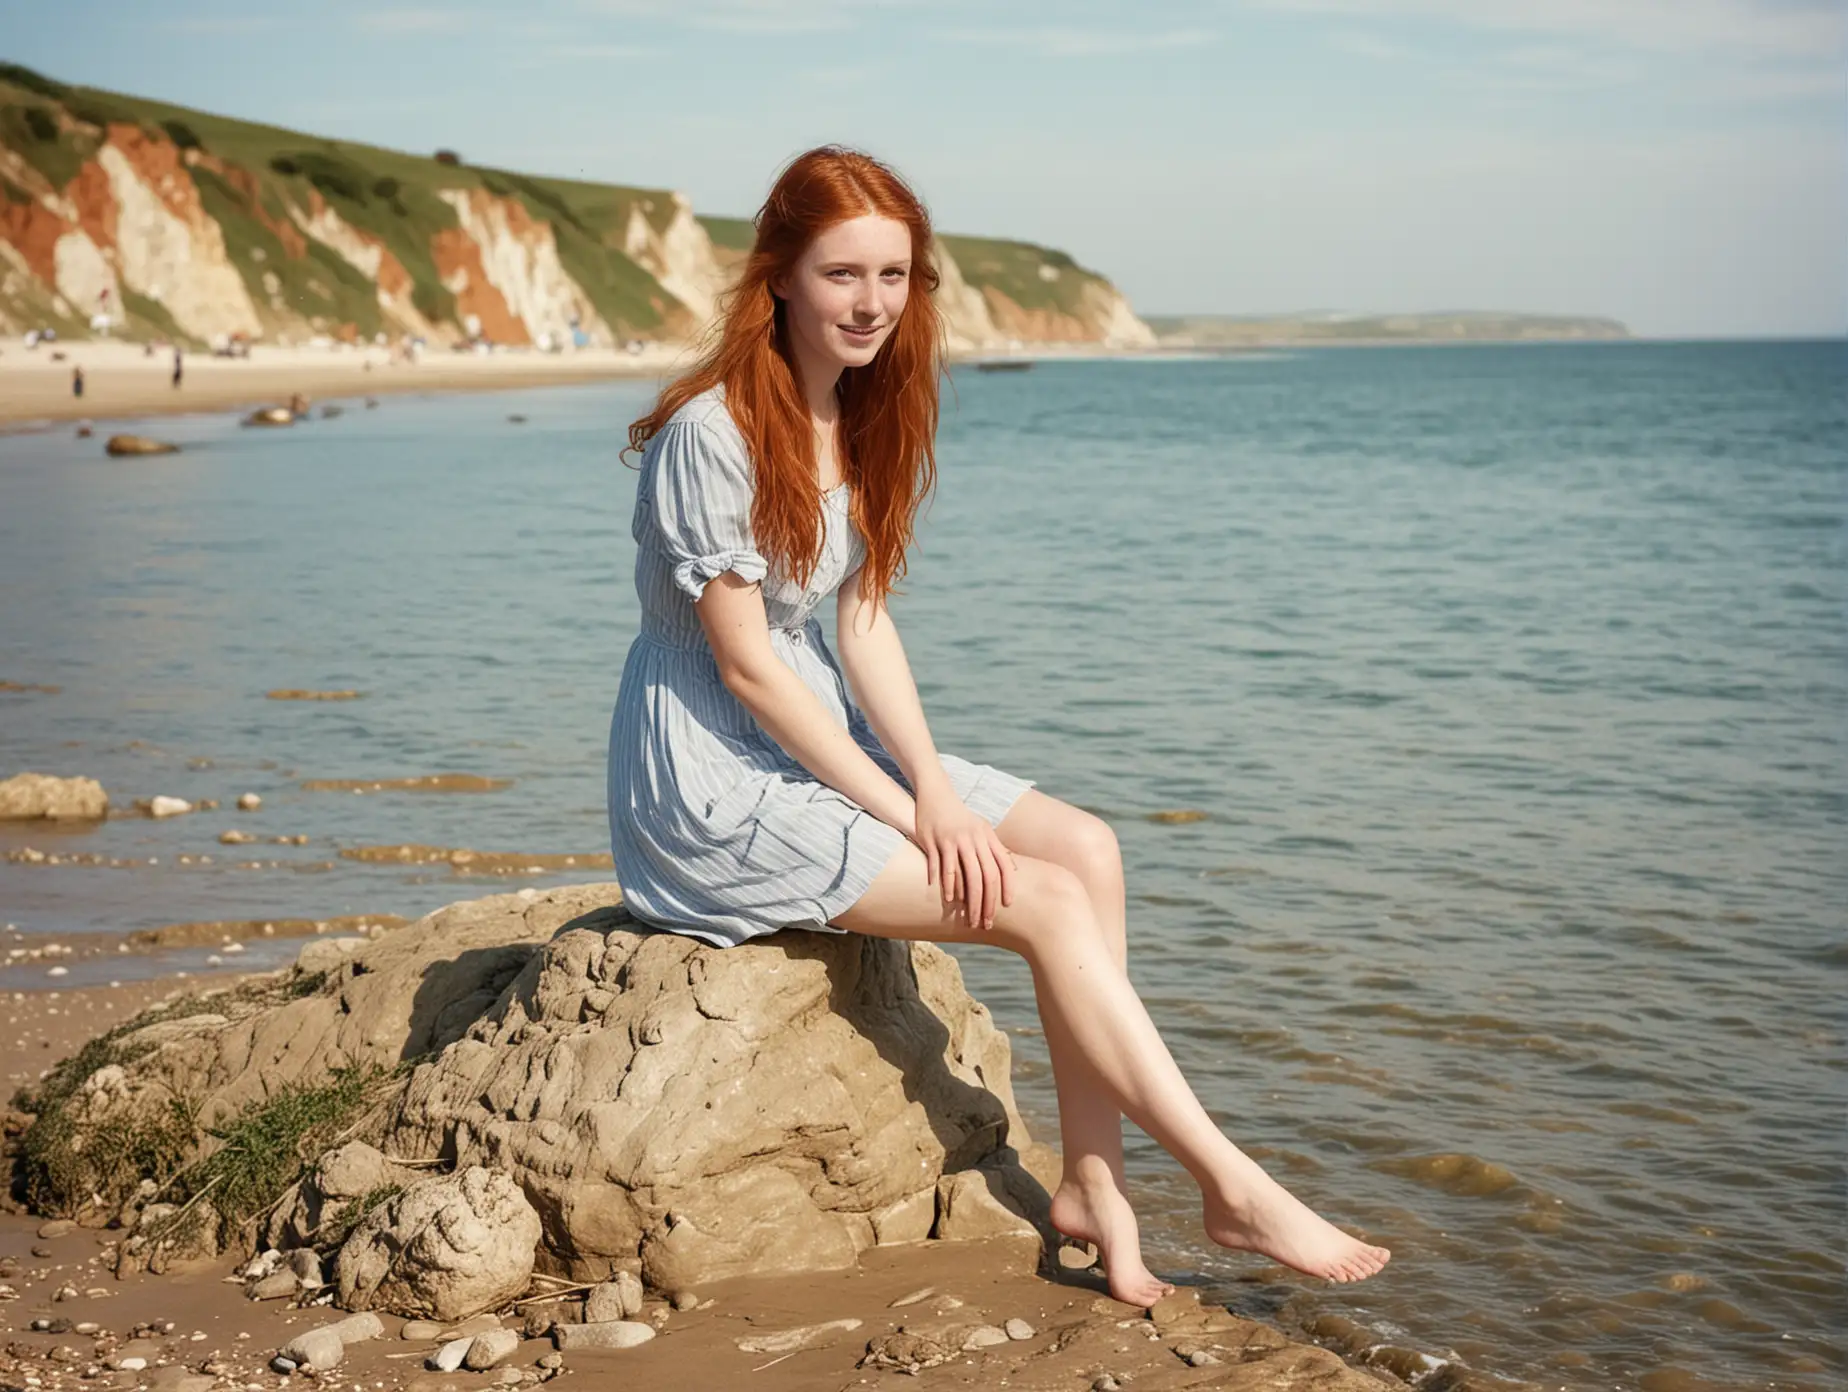 20 year old English woman, with long red hair, legs, Dorset coast, 1900s, seaside